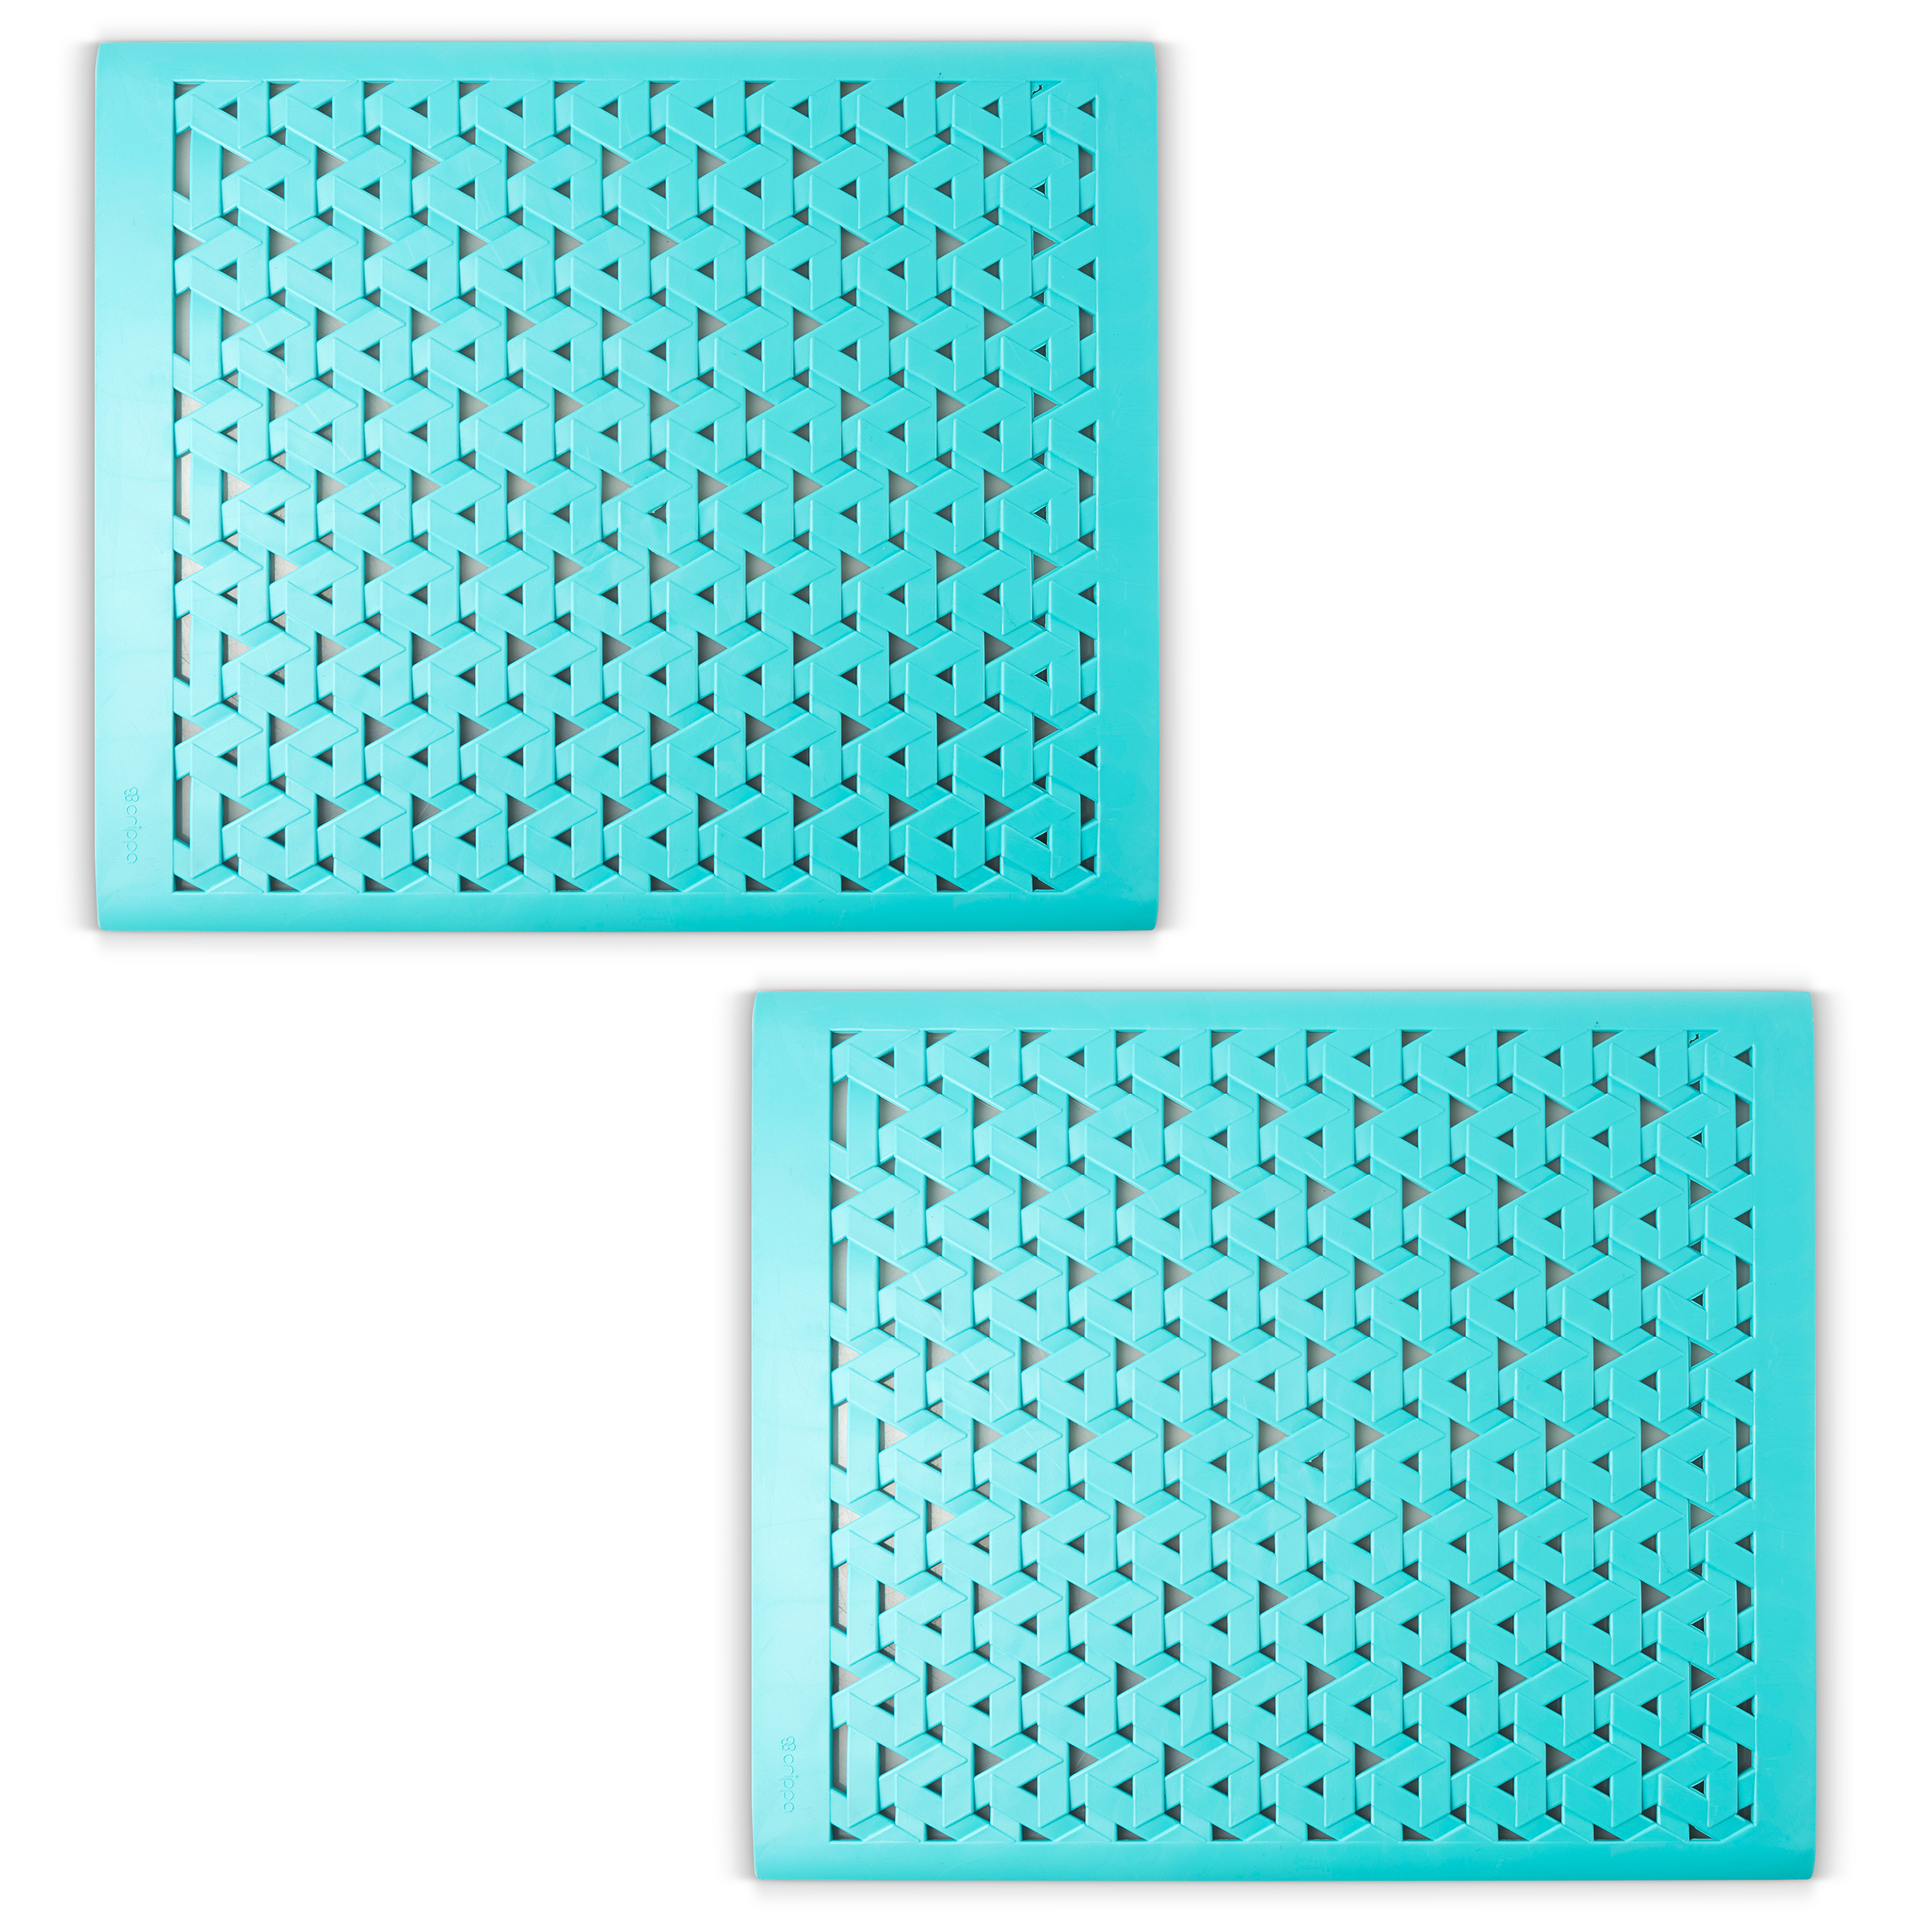 Crippa Kitchen Sink Protector Mat | Set of 2 Sink Mats for Porcelain Sink | Kitchen Sink Mats For Double Sink | Anti-Bacterial, Mildew Resistant Sink Mats | Turquoise - image 1 of 6